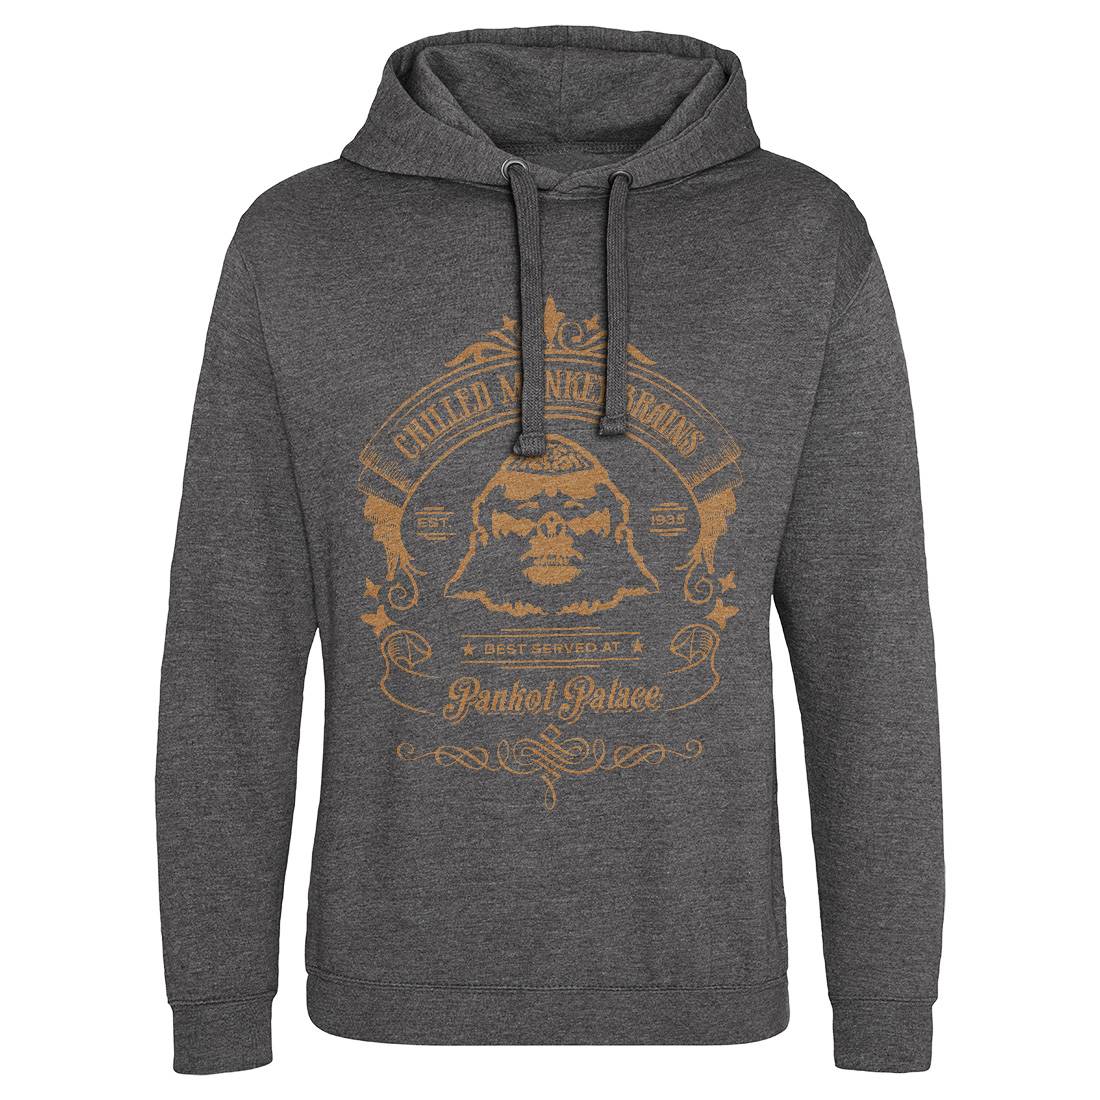 Chilled Monkey Brains Mens Hoodie Without Pocket Food D239